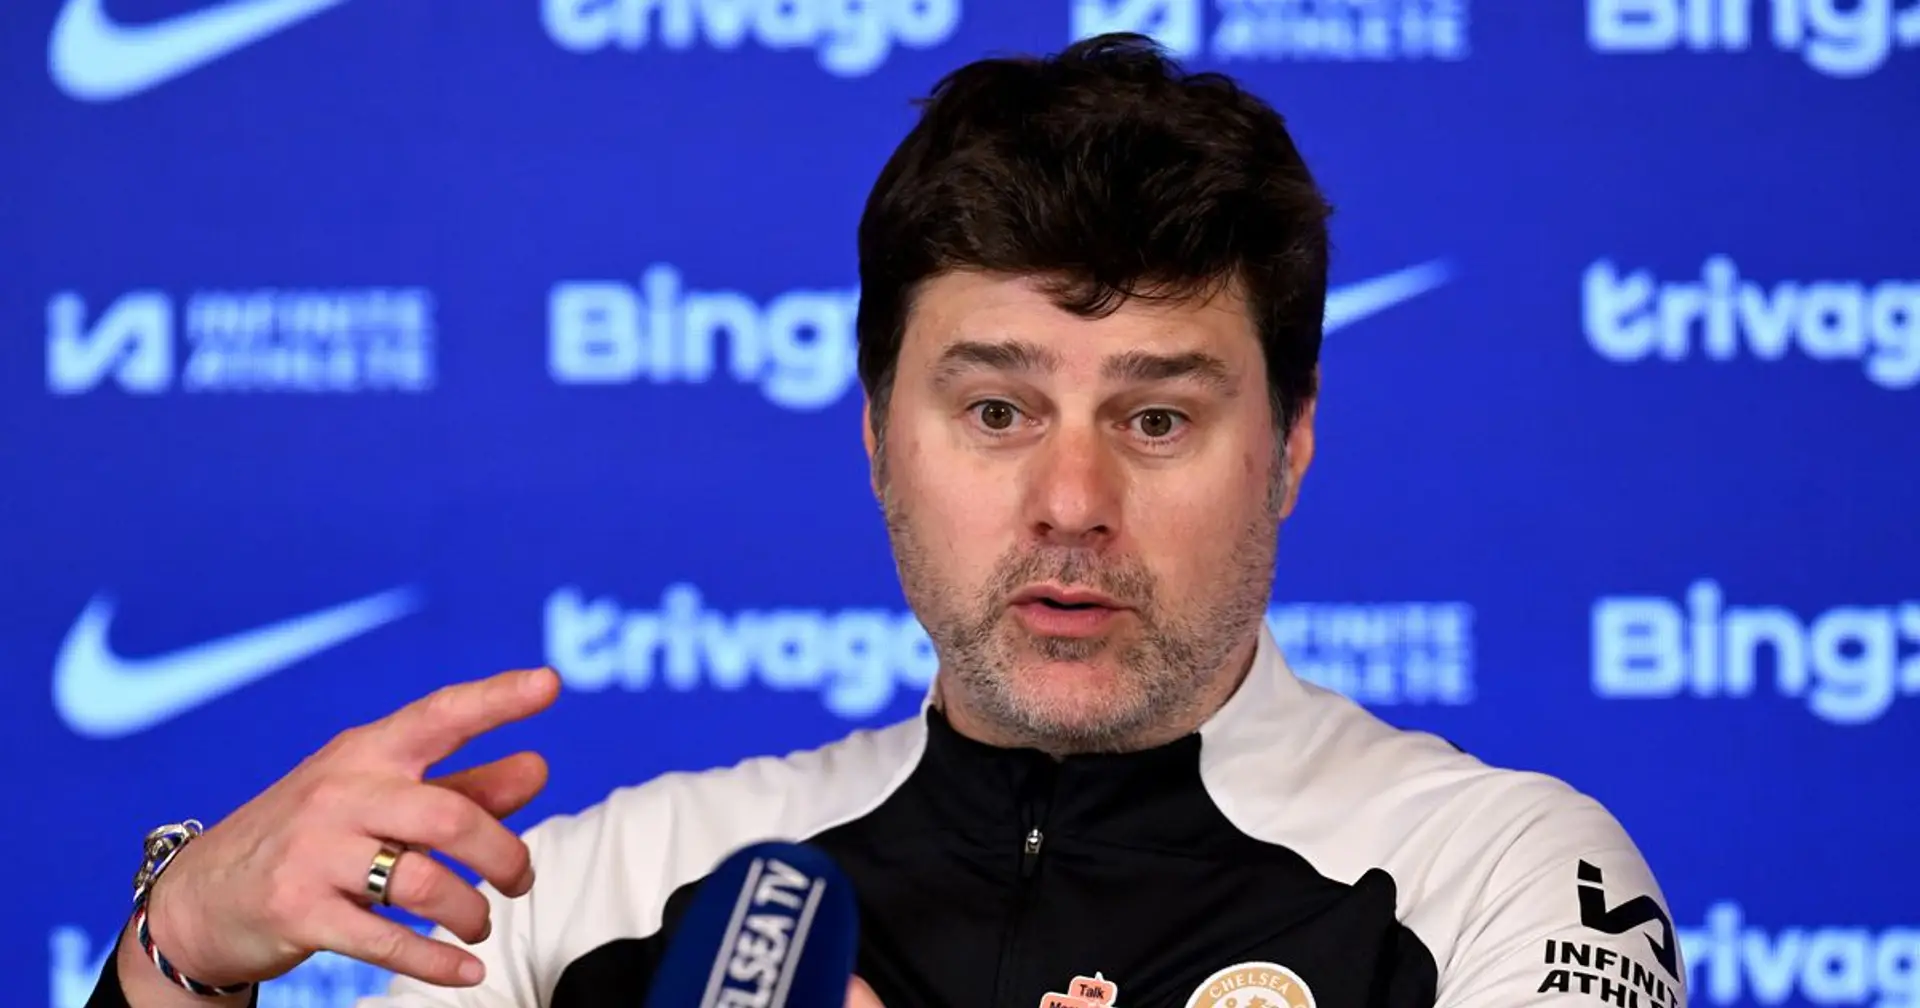 'I'm not here to be a populist': Pochettino explains how he plans to build genuine relationship with Chelsea fans